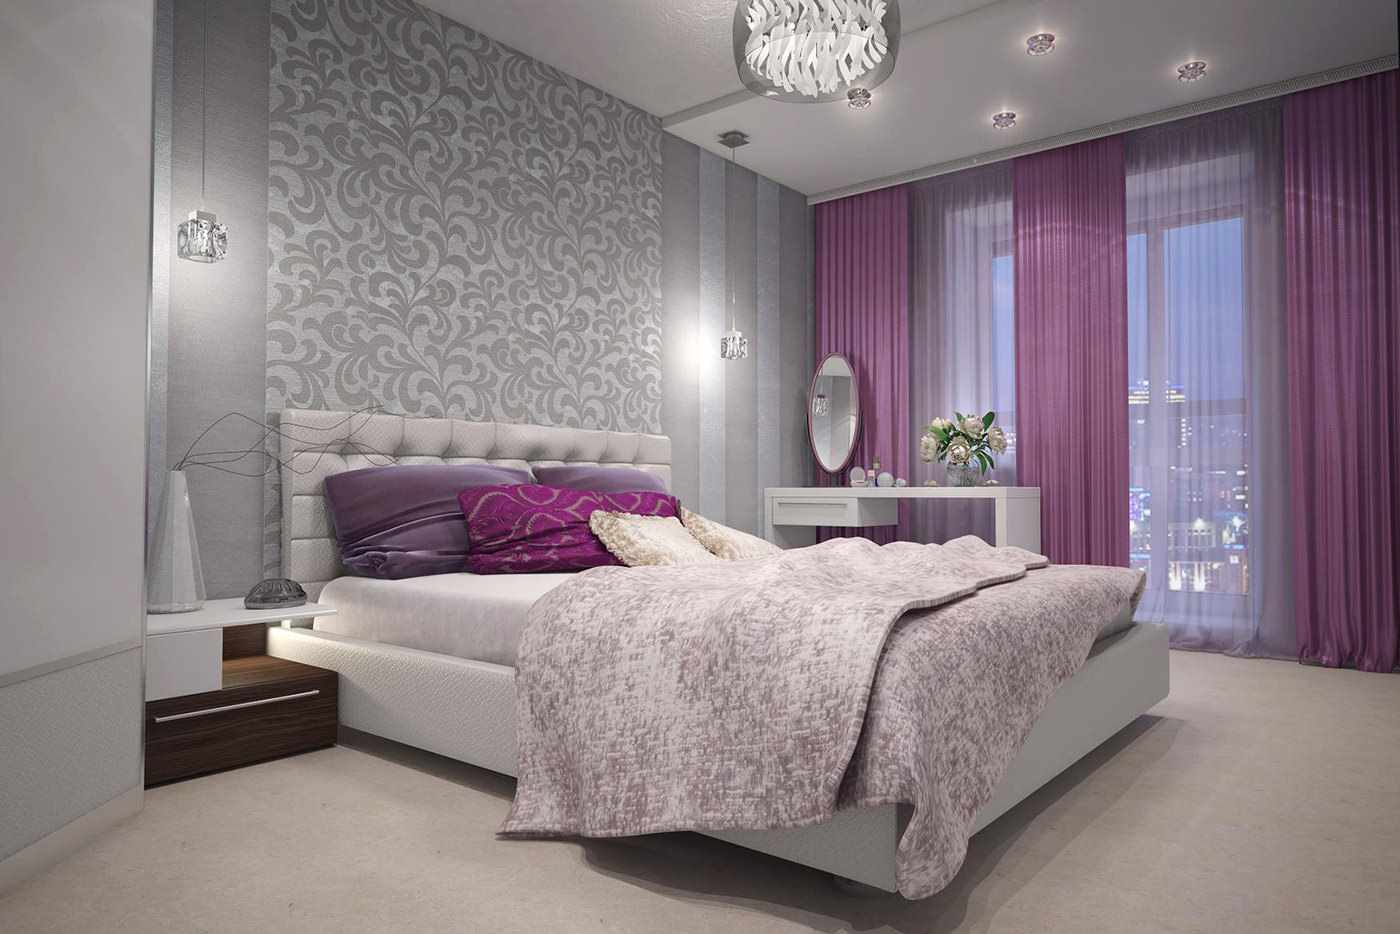 An example of a light decoration of wall design in a bedroom